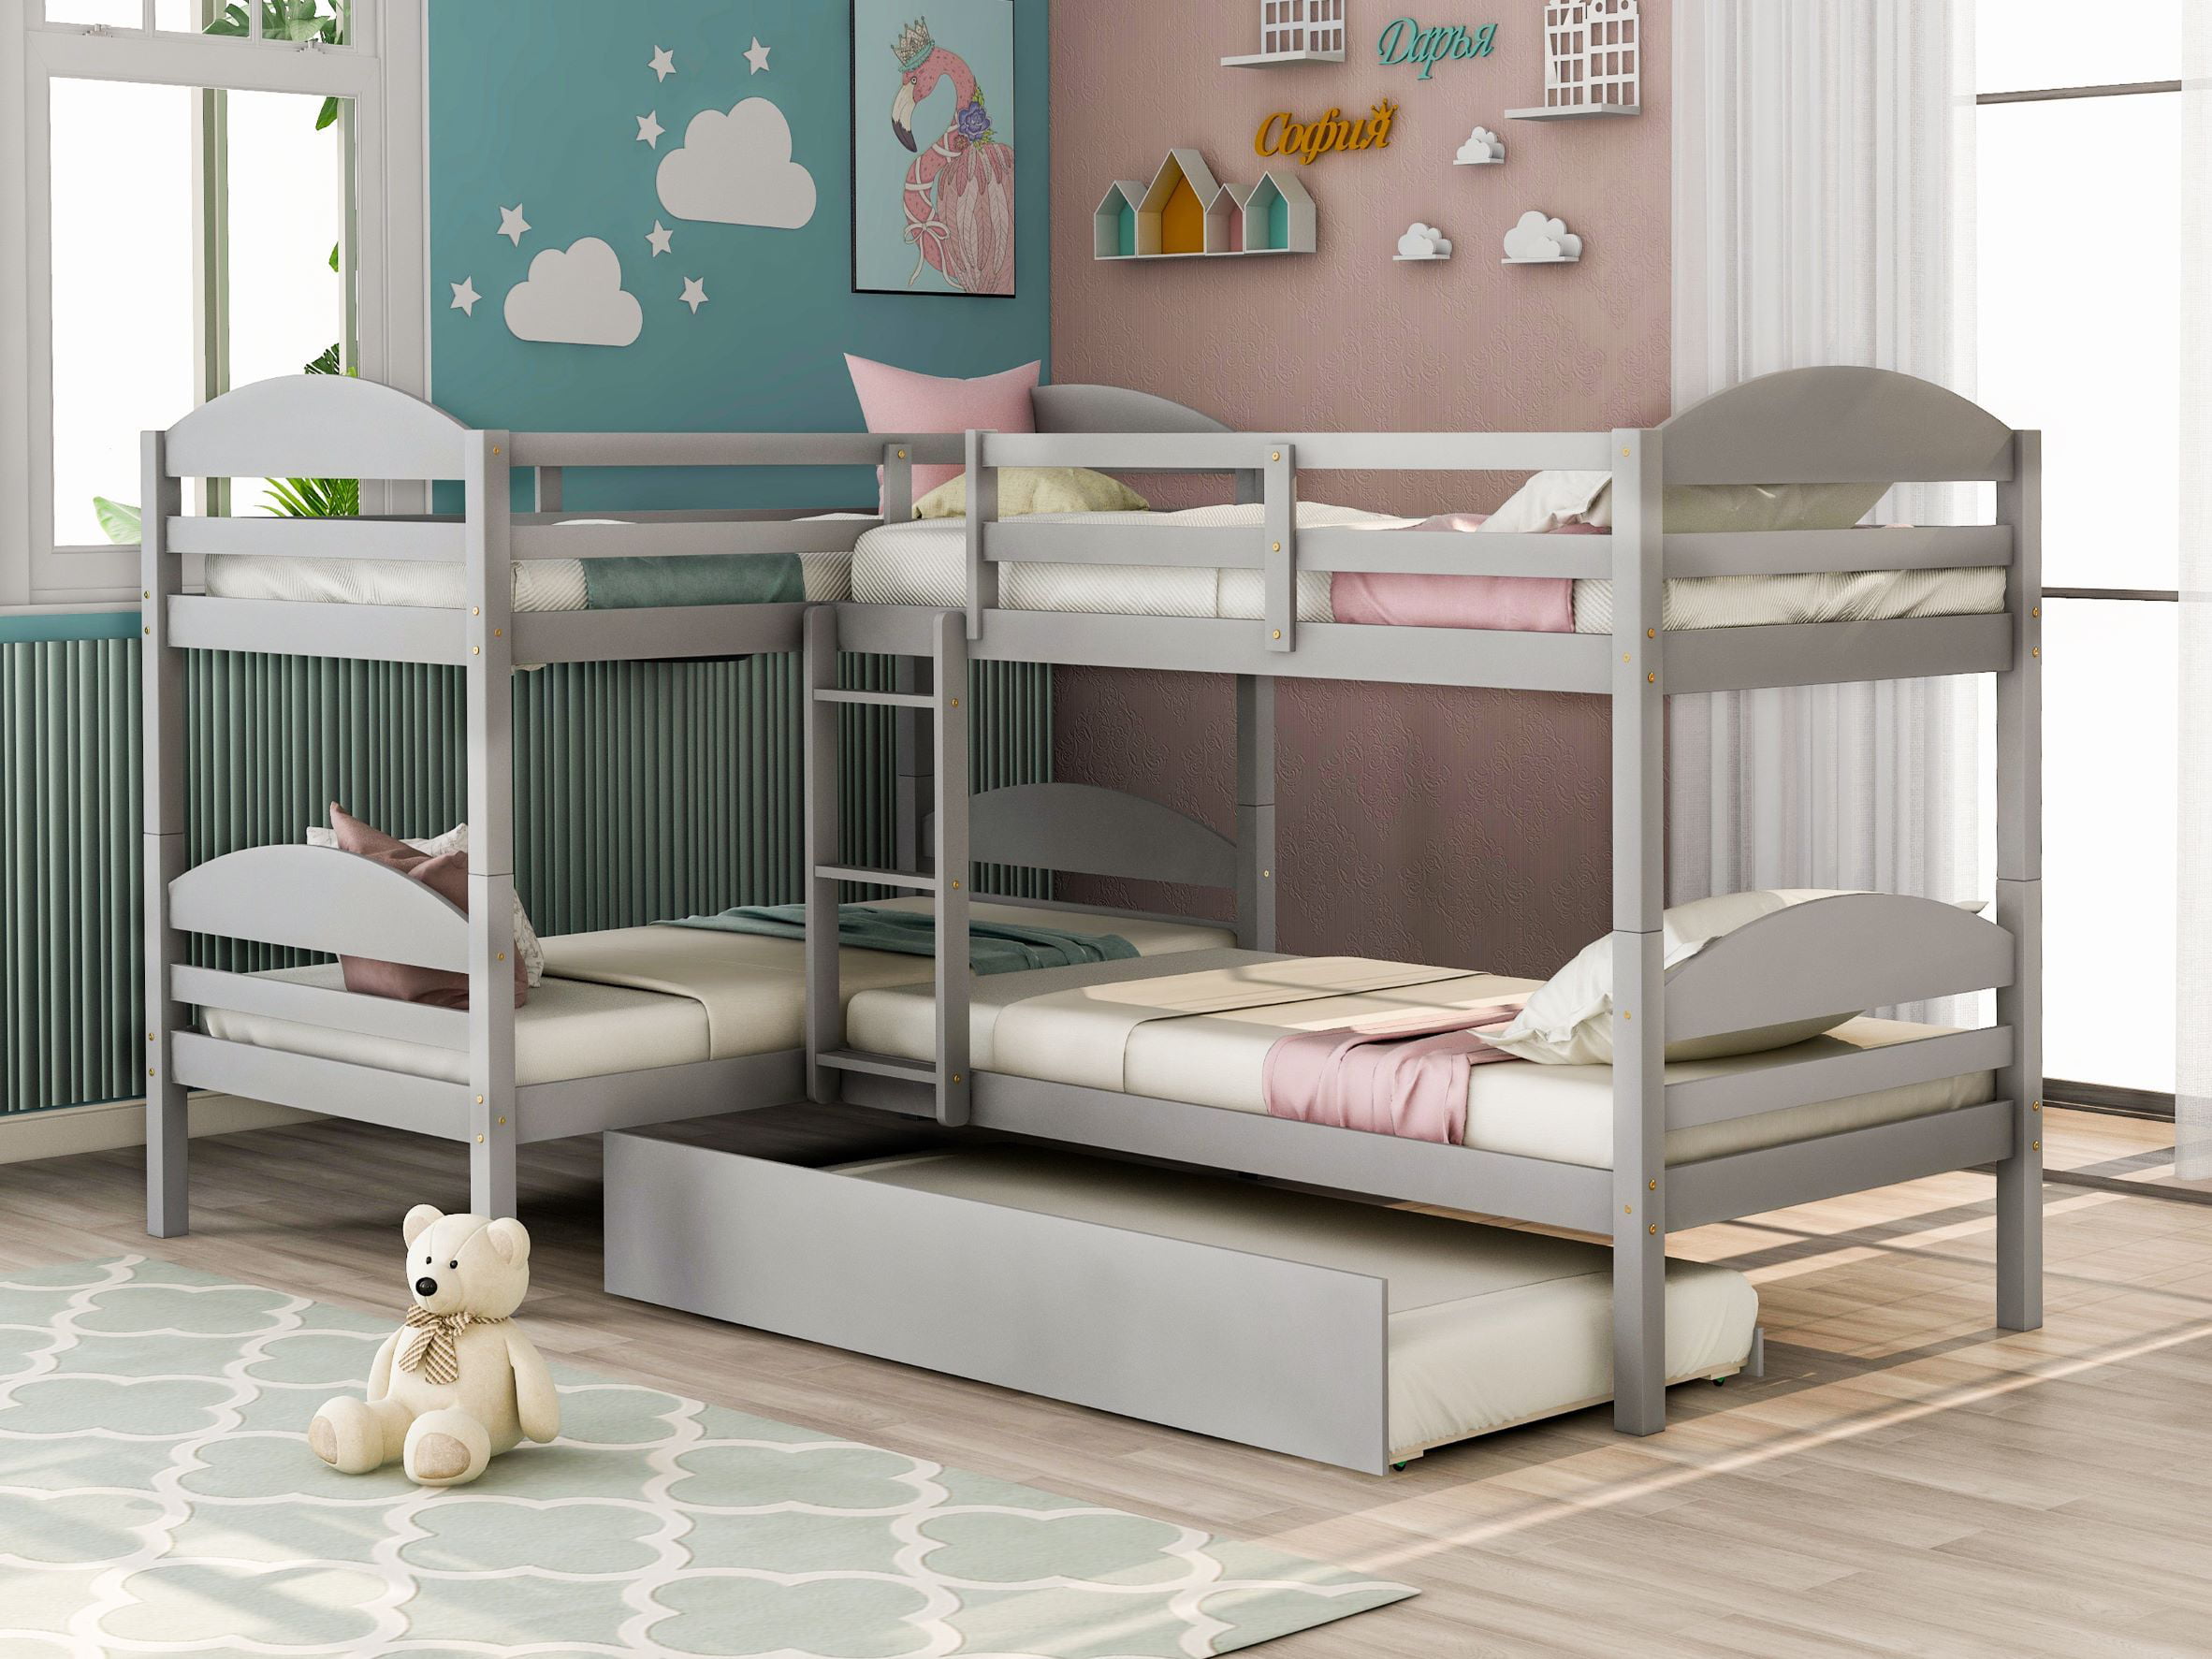 L Shaped Bunk Bed Kids Deds For 4, Isabelle Twin Over Bunk Bed With Storage